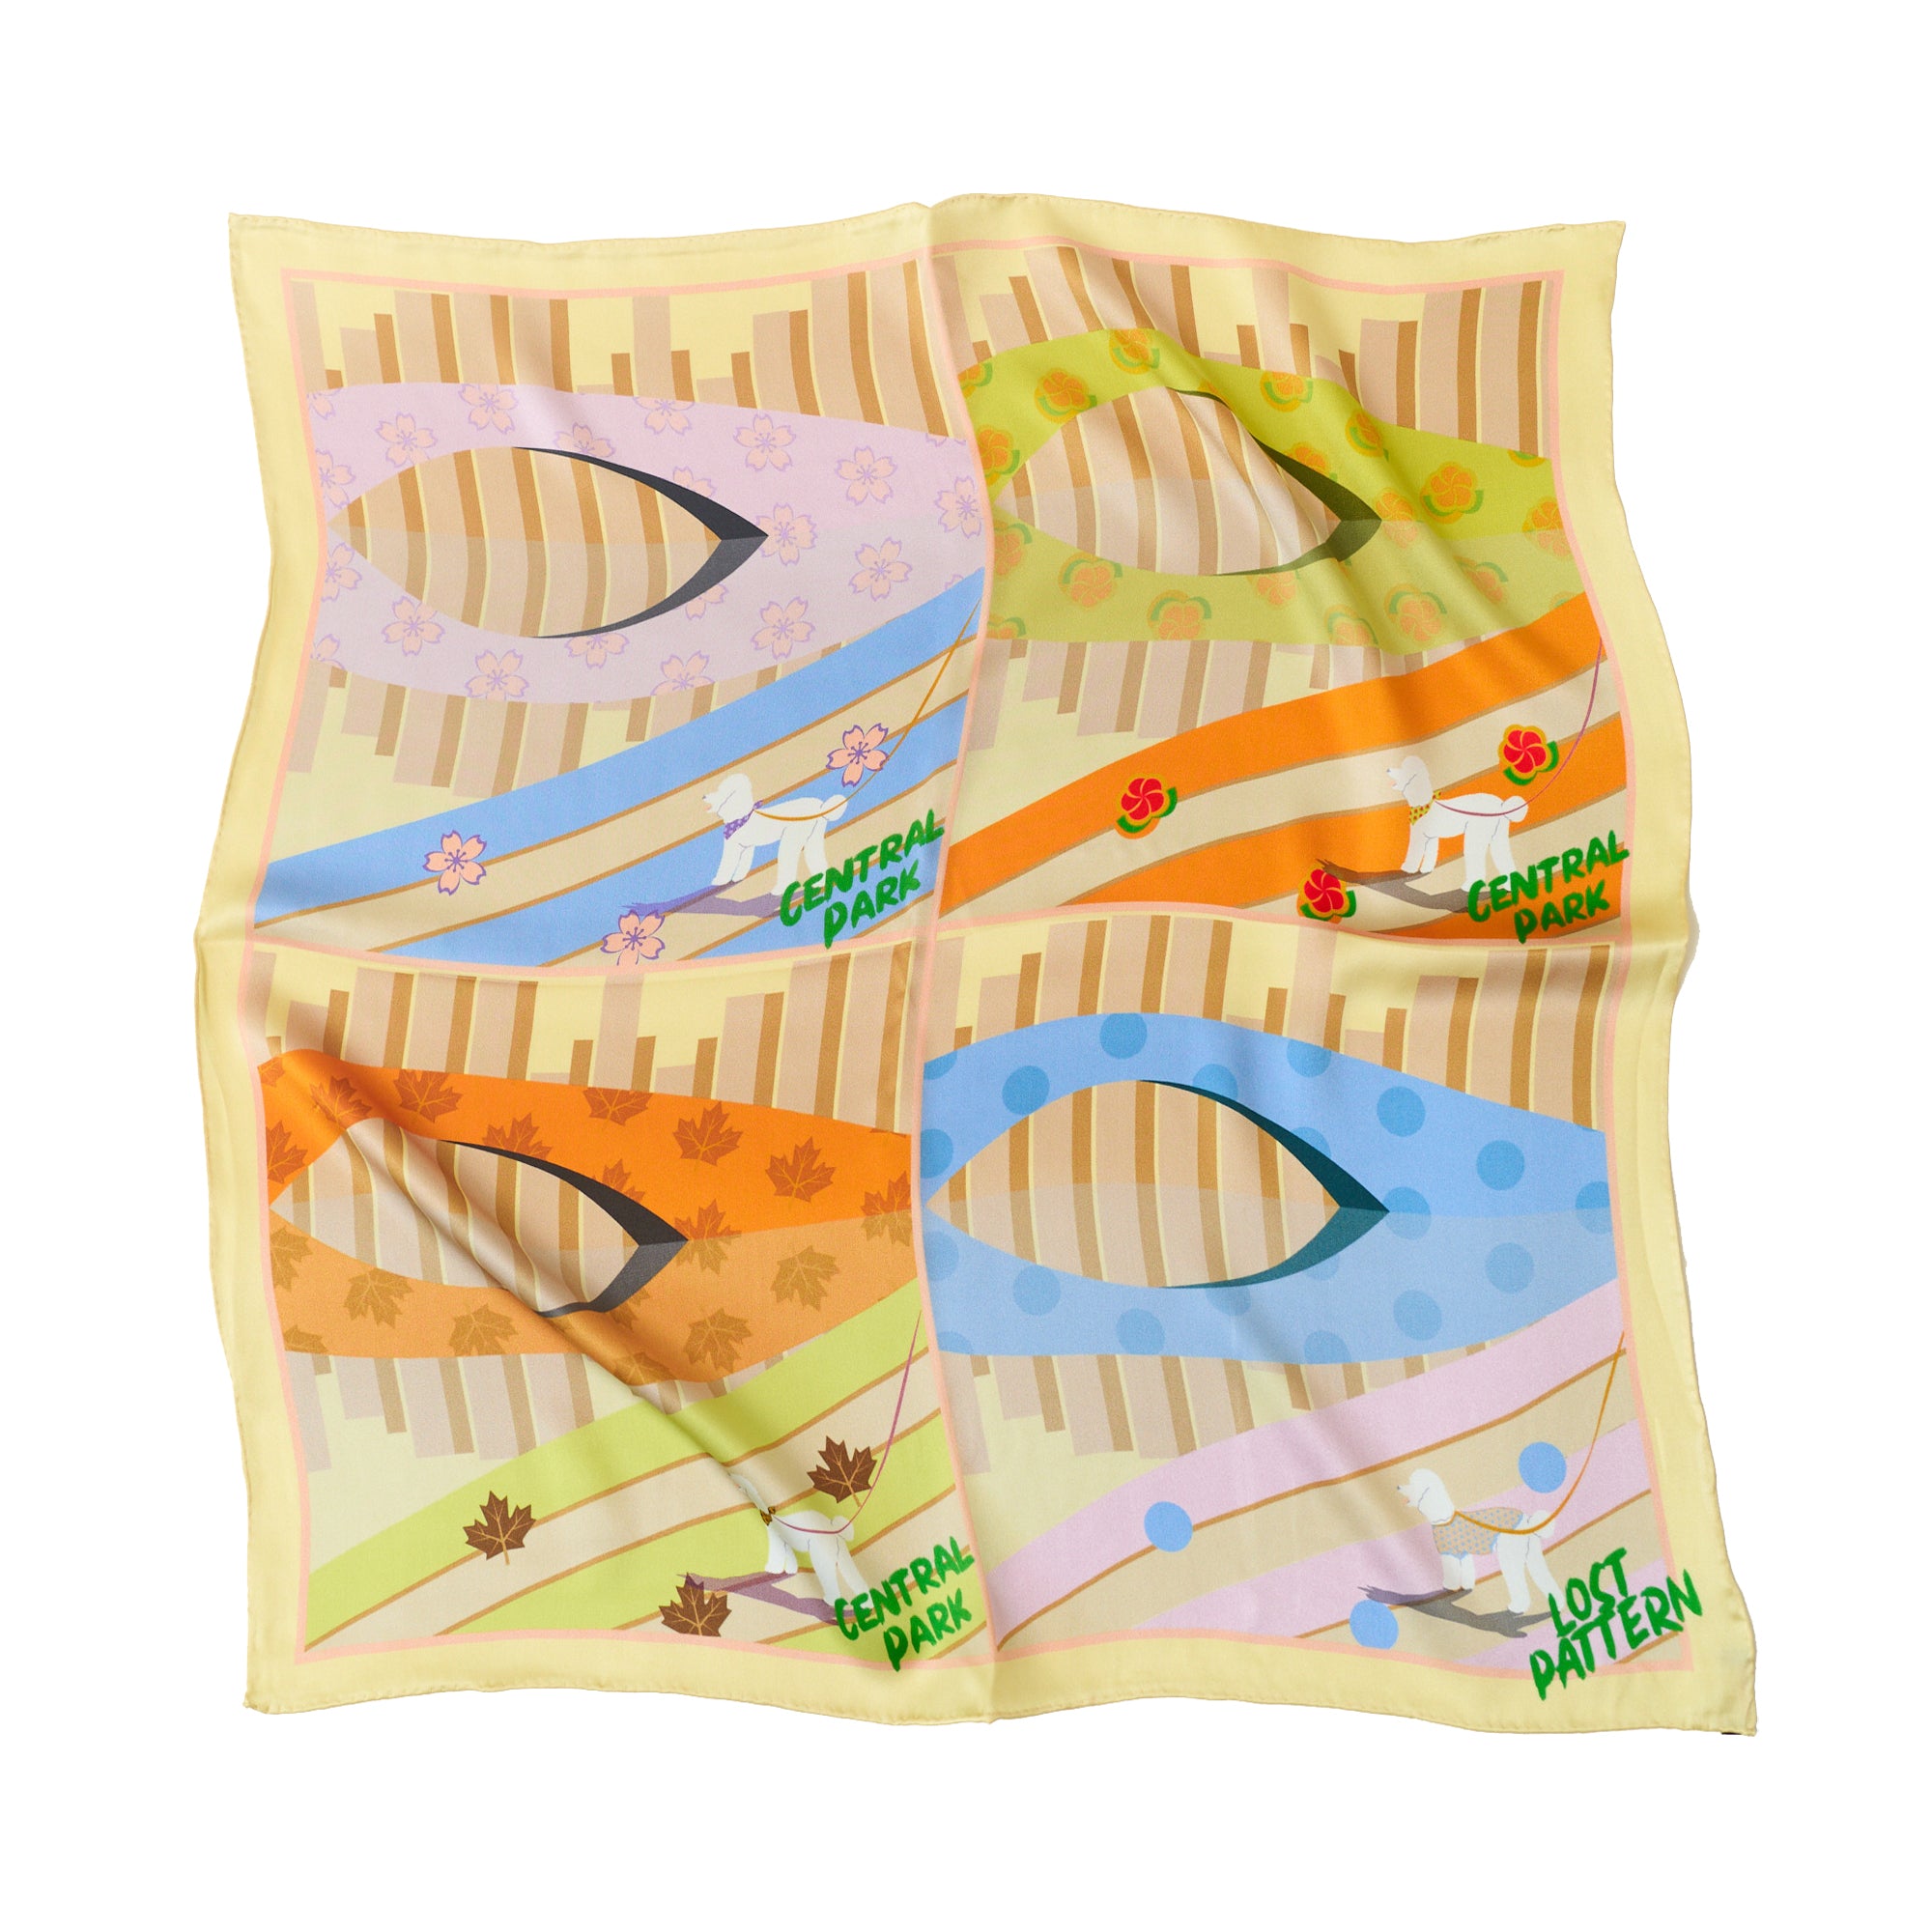 "Seasons in the Park" Silk Scarf - Yellow - Yellow - LOST PATTERN Silk Square Scarf